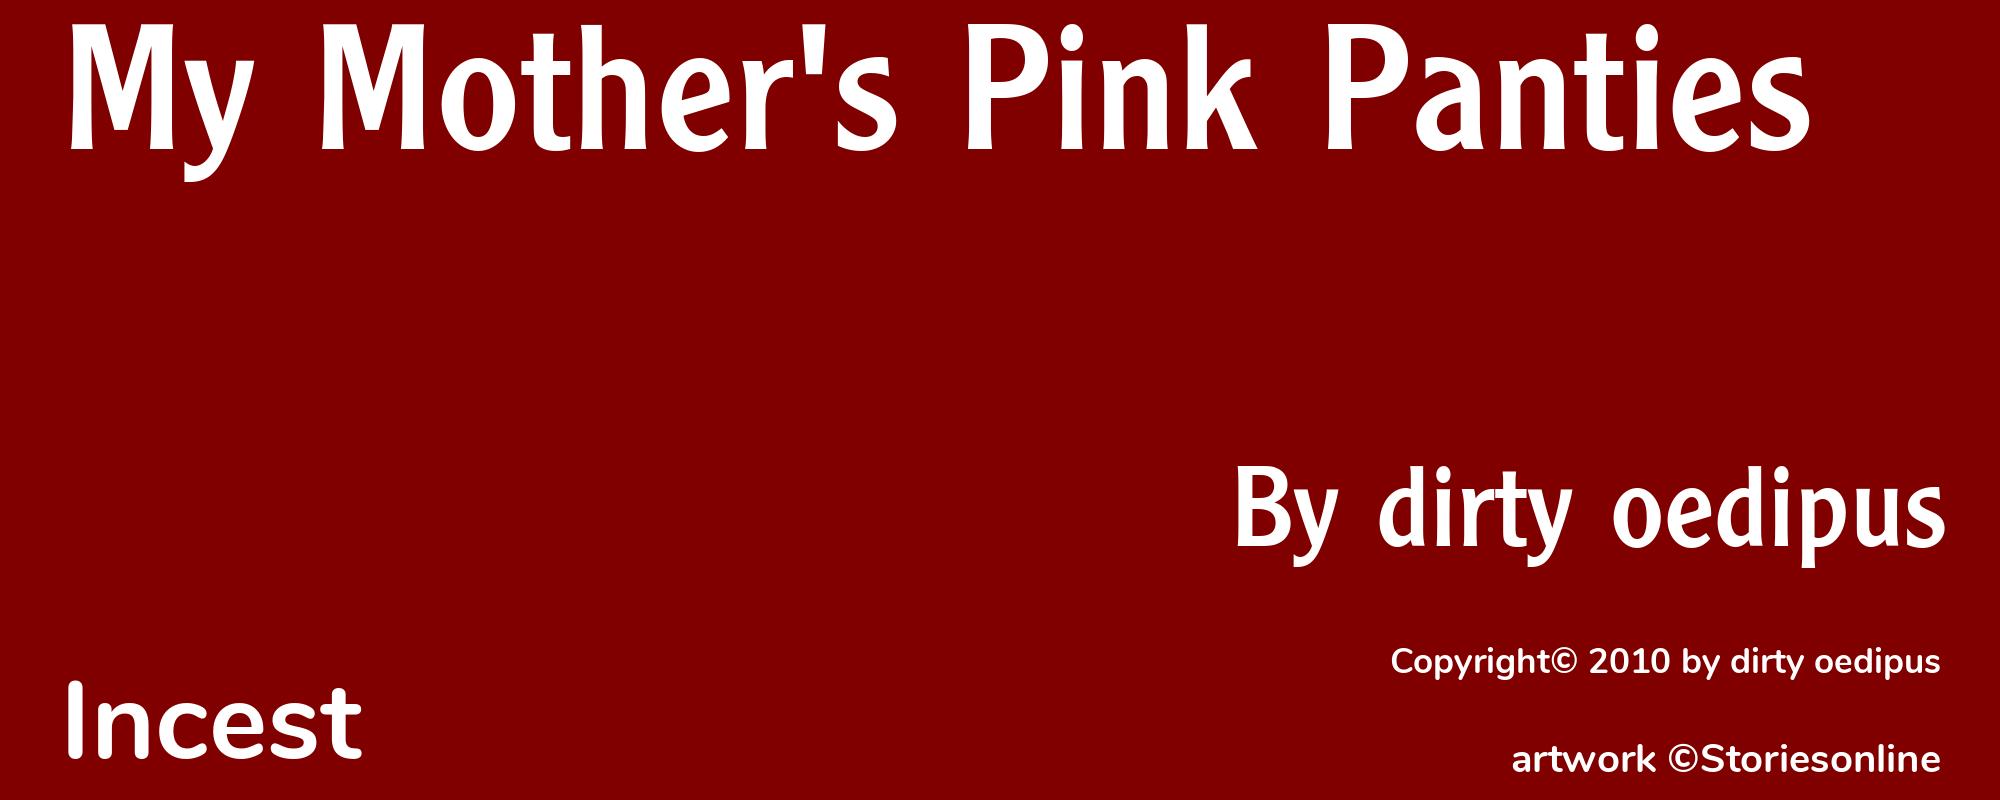 My Mother's Pink Panties - Cover